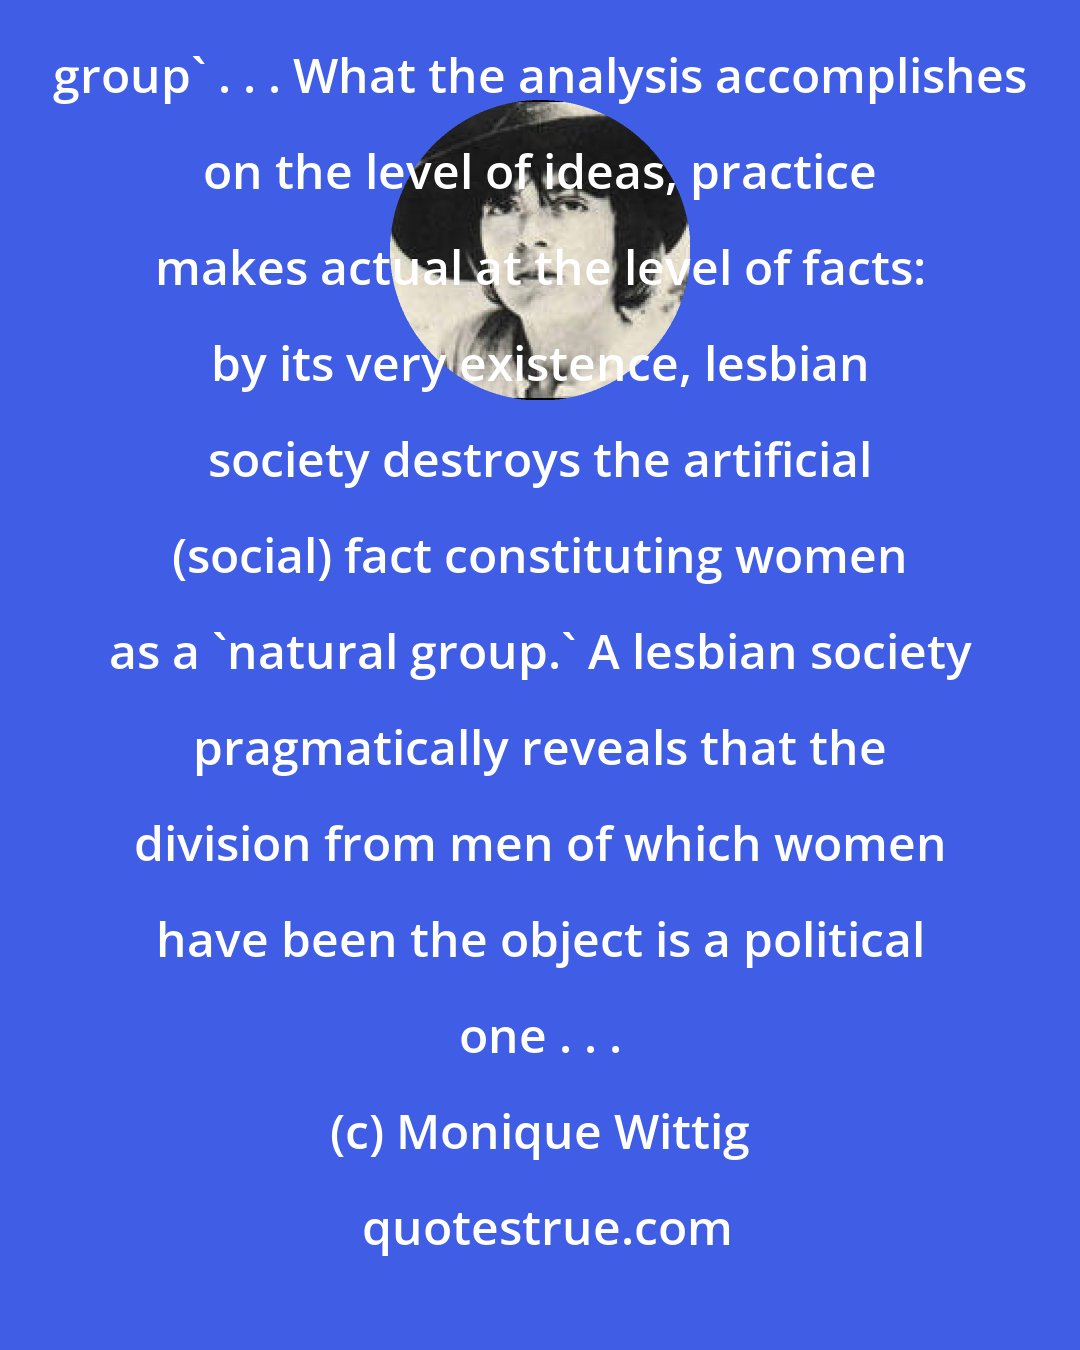 Monique Wittig: A materialist feminist approach to women's oppression destroys the idea that women are a 'natural group' . . . What the analysis accomplishes on the level of ideas, practice makes actual at the level of facts: by its very existence, lesbian society destroys the artificial (social) fact constituting women as a 'natural group.' A lesbian society pragmatically reveals that the division from men of which women have been the object is a political one . . .